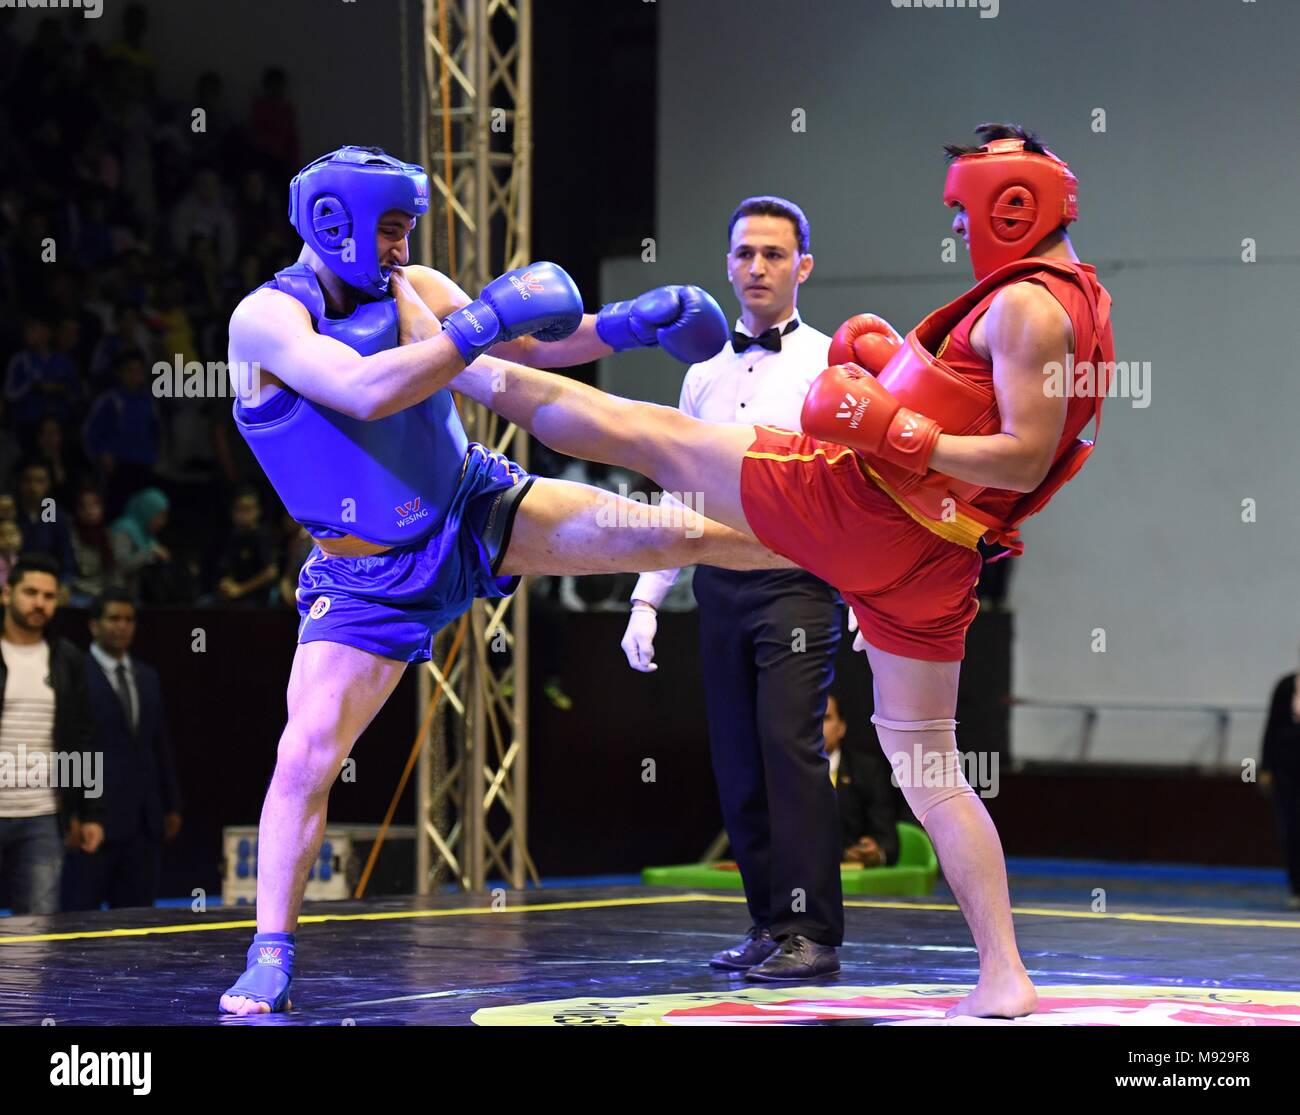 Cairo, Egypt. 21st Mar, 2018. Pang Shuai (R) of China fights with Mahmoud Atef of Eygpt during the 90kg category of the 2018 Horus Cup of free combat competiton between China and Egypt in Cairo, Egypt, on March 21, 2018. China won 5-3. Credit: Wu Huiwo/Xinhua/Alamy Live News Stock Photo